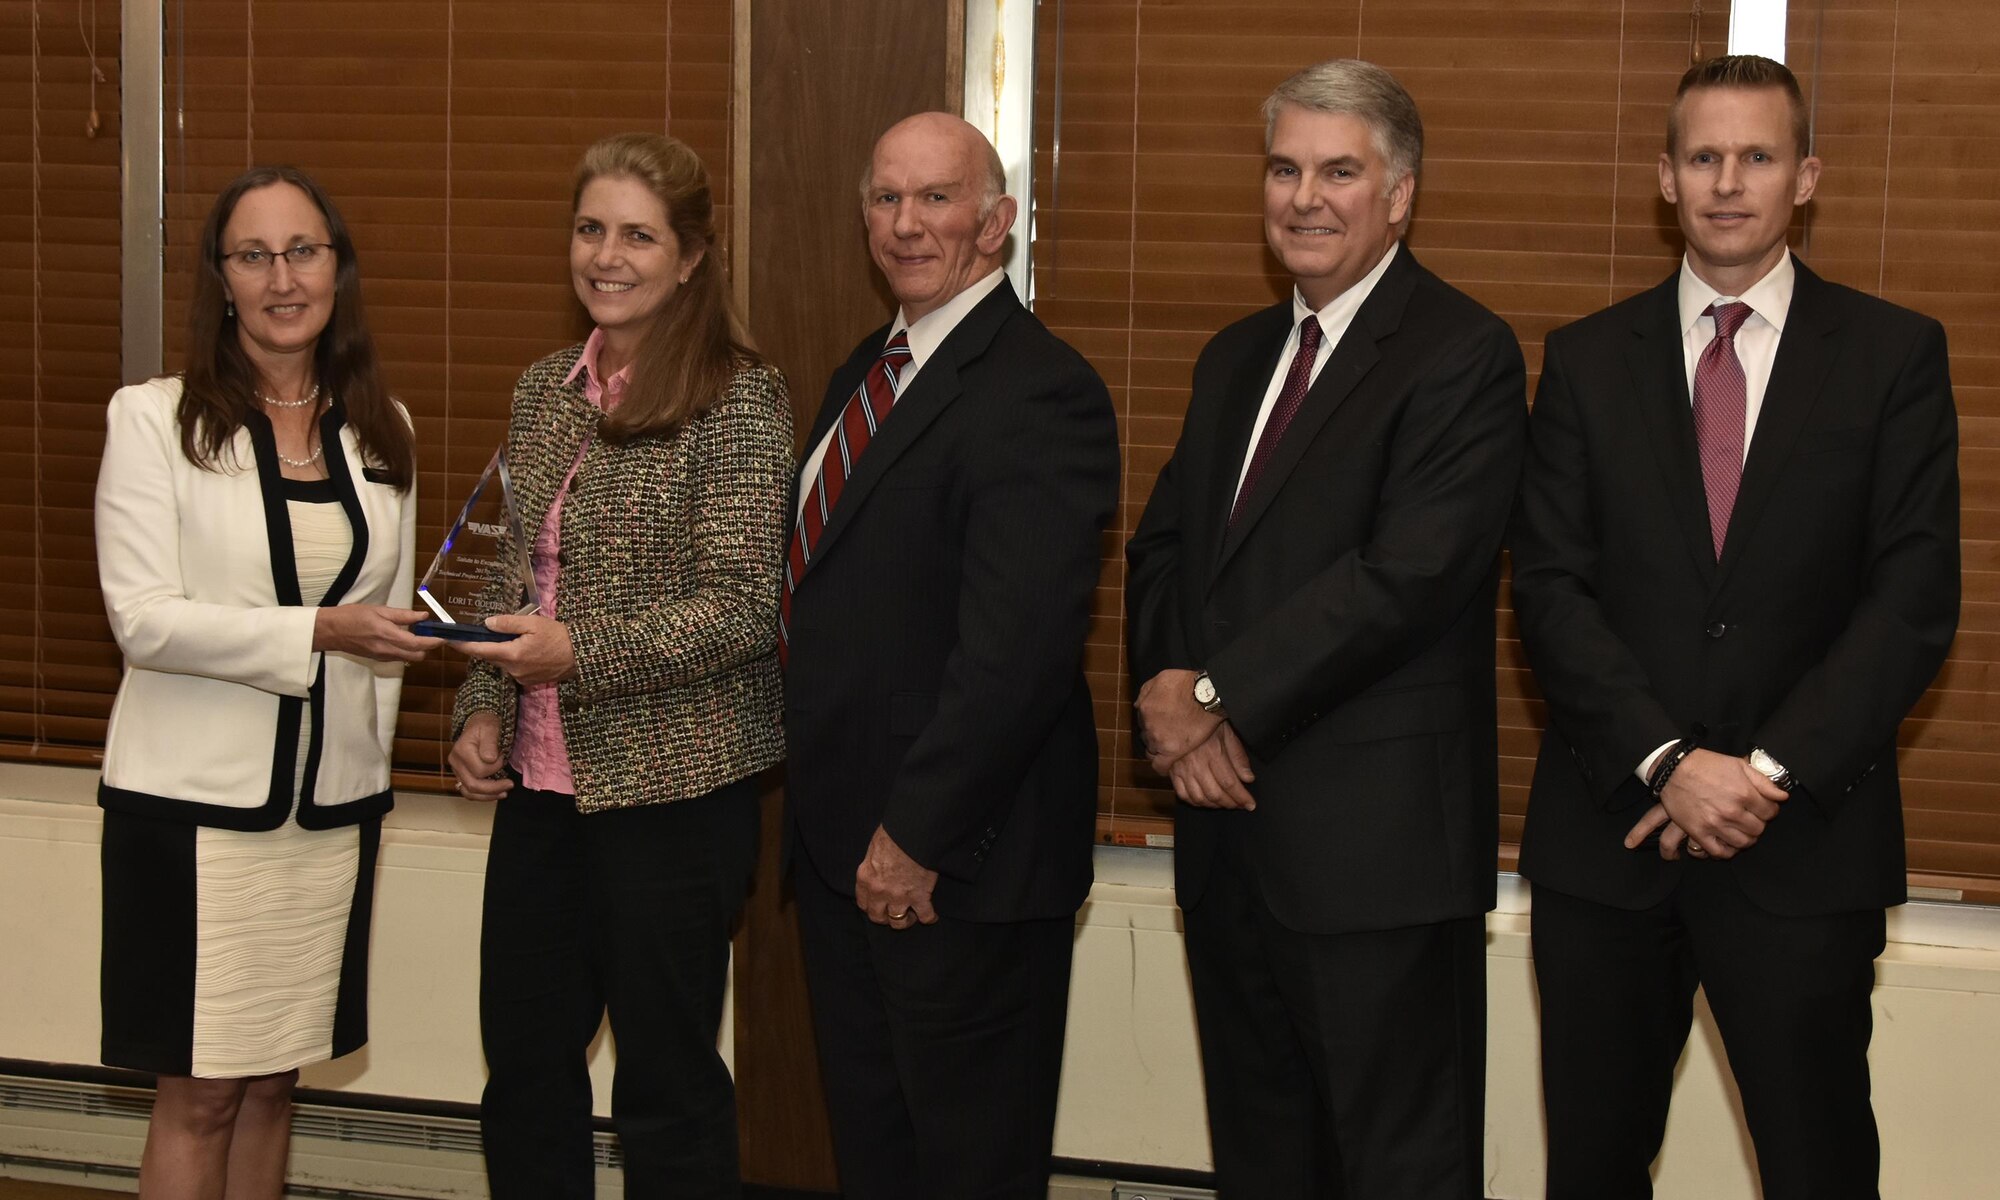 : Lori Golden (second from left), NAS Software technical project manager, receives the Technical Project Leader of the Year Award from NAS General Manager Cynthia Rivera during the National Aerospace Solutions 2017 Salute to Excellence Annual Awards Banquet held Nov. 16 at the Arnold Lakeside Center, Arnold AFB. Also pictured is NAS Deputy General Manager Doug Pearson, NAS Test and Sustainment Engineering Manager Jeff Henderson, and NAS Integrated Resources Director Ben Souther. (U.S. Air Force photo/Rick Goodfriend)